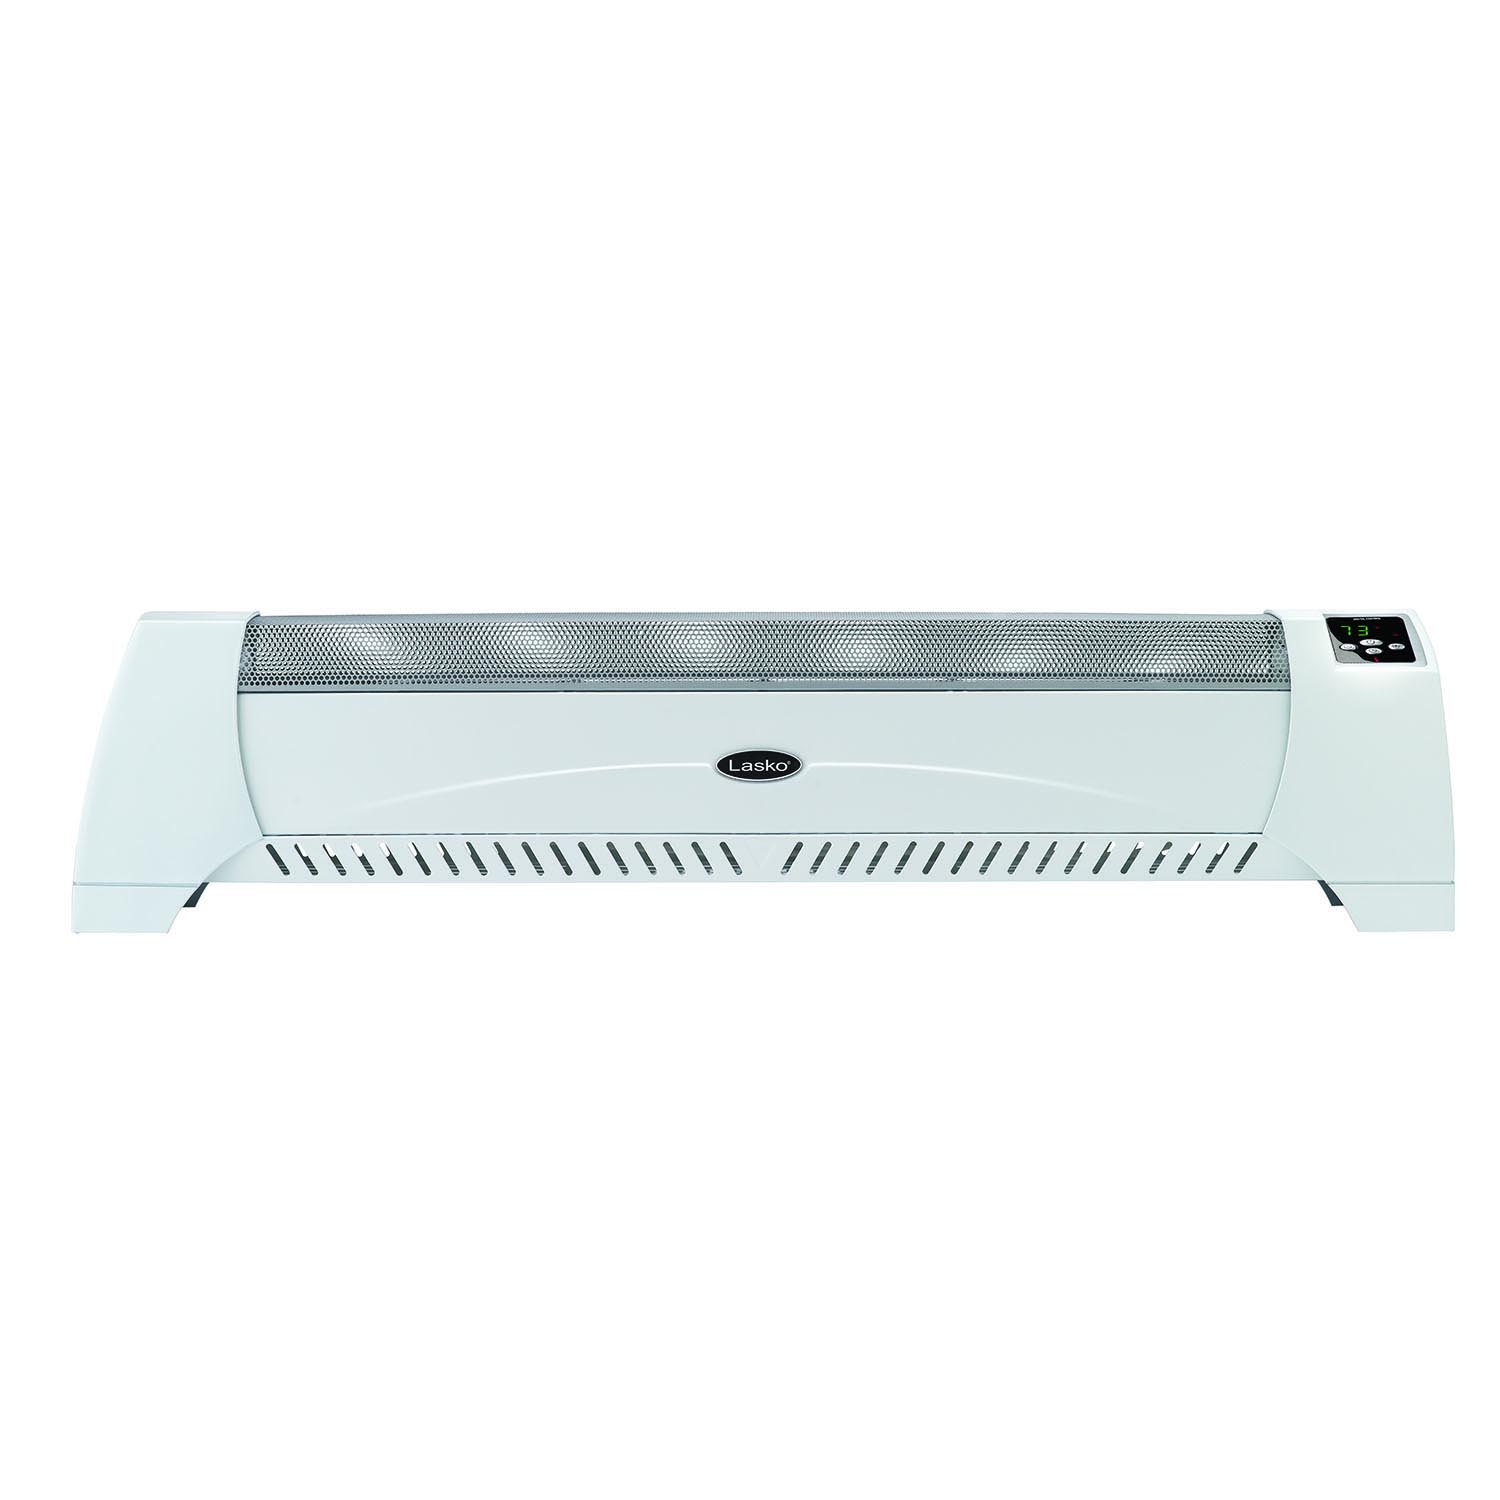 Lasko Silent Heater with Digital Display, White - image 1 of 5